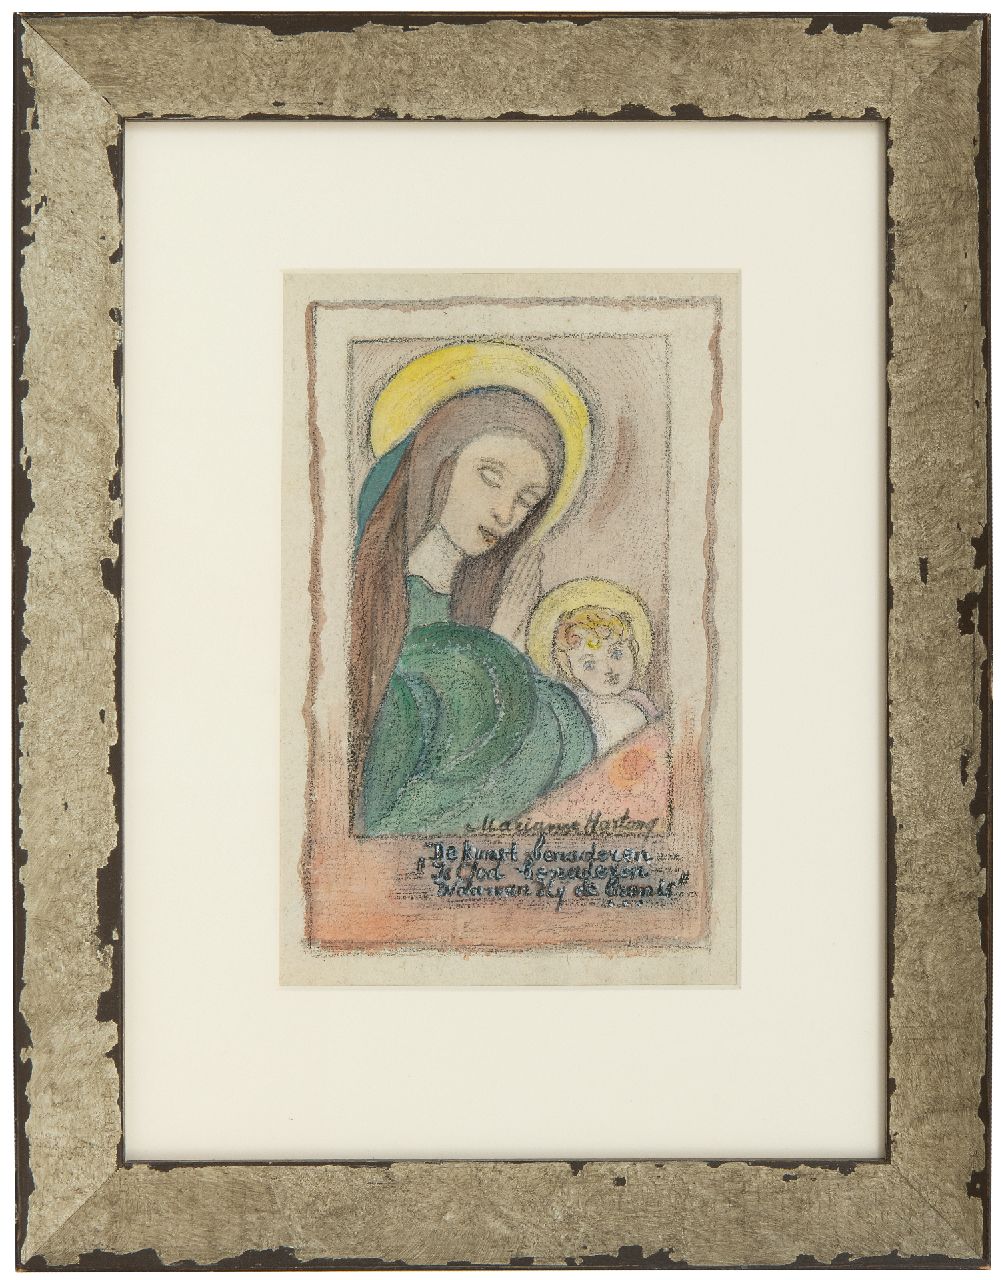 Hartong M.A.E.  | Maria Anna Elisabeth ‘Marianne’ Hartong | Watercolours and drawings offered for sale | Madonna and child, chalk and watercolour on paper 21.9 x 15.2 cm, signed l.r.